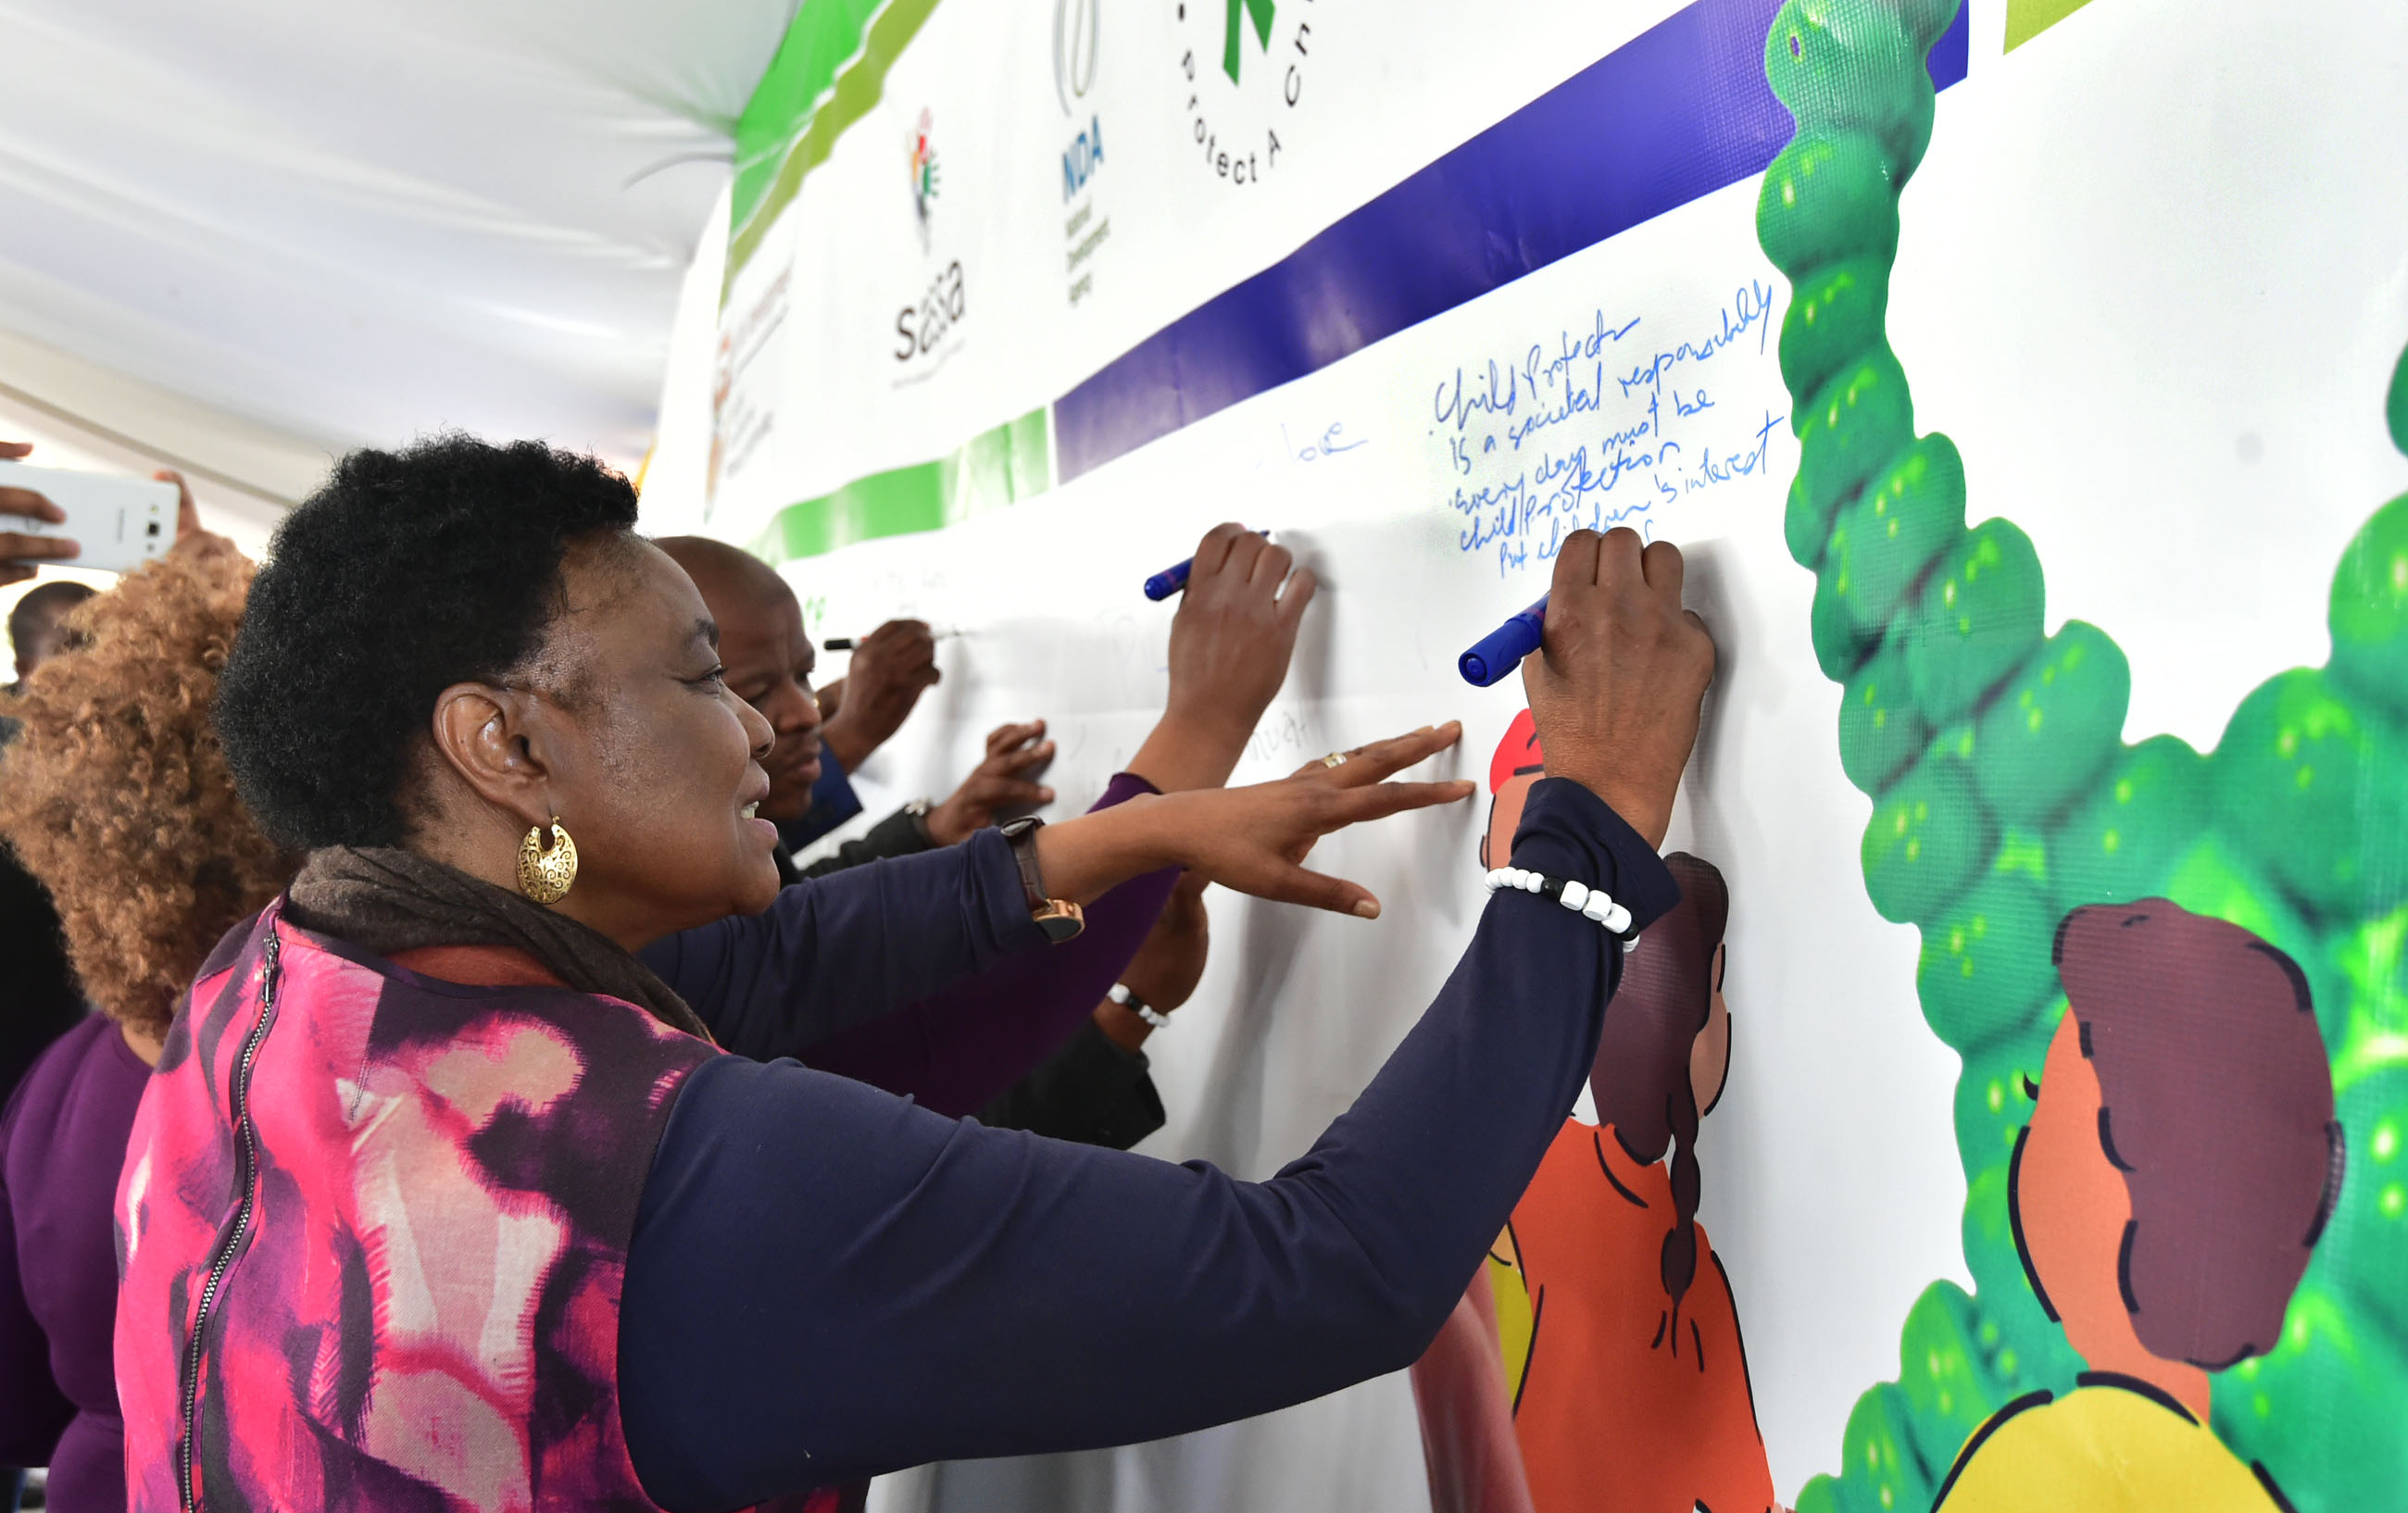 South Africa's minister of home affairs, Hlengiwe Buhle Mkhize, signs a pledge in support of child protection in Langa, Cape Town, in May 2017. Photo: Kopano Tlape/GCIS